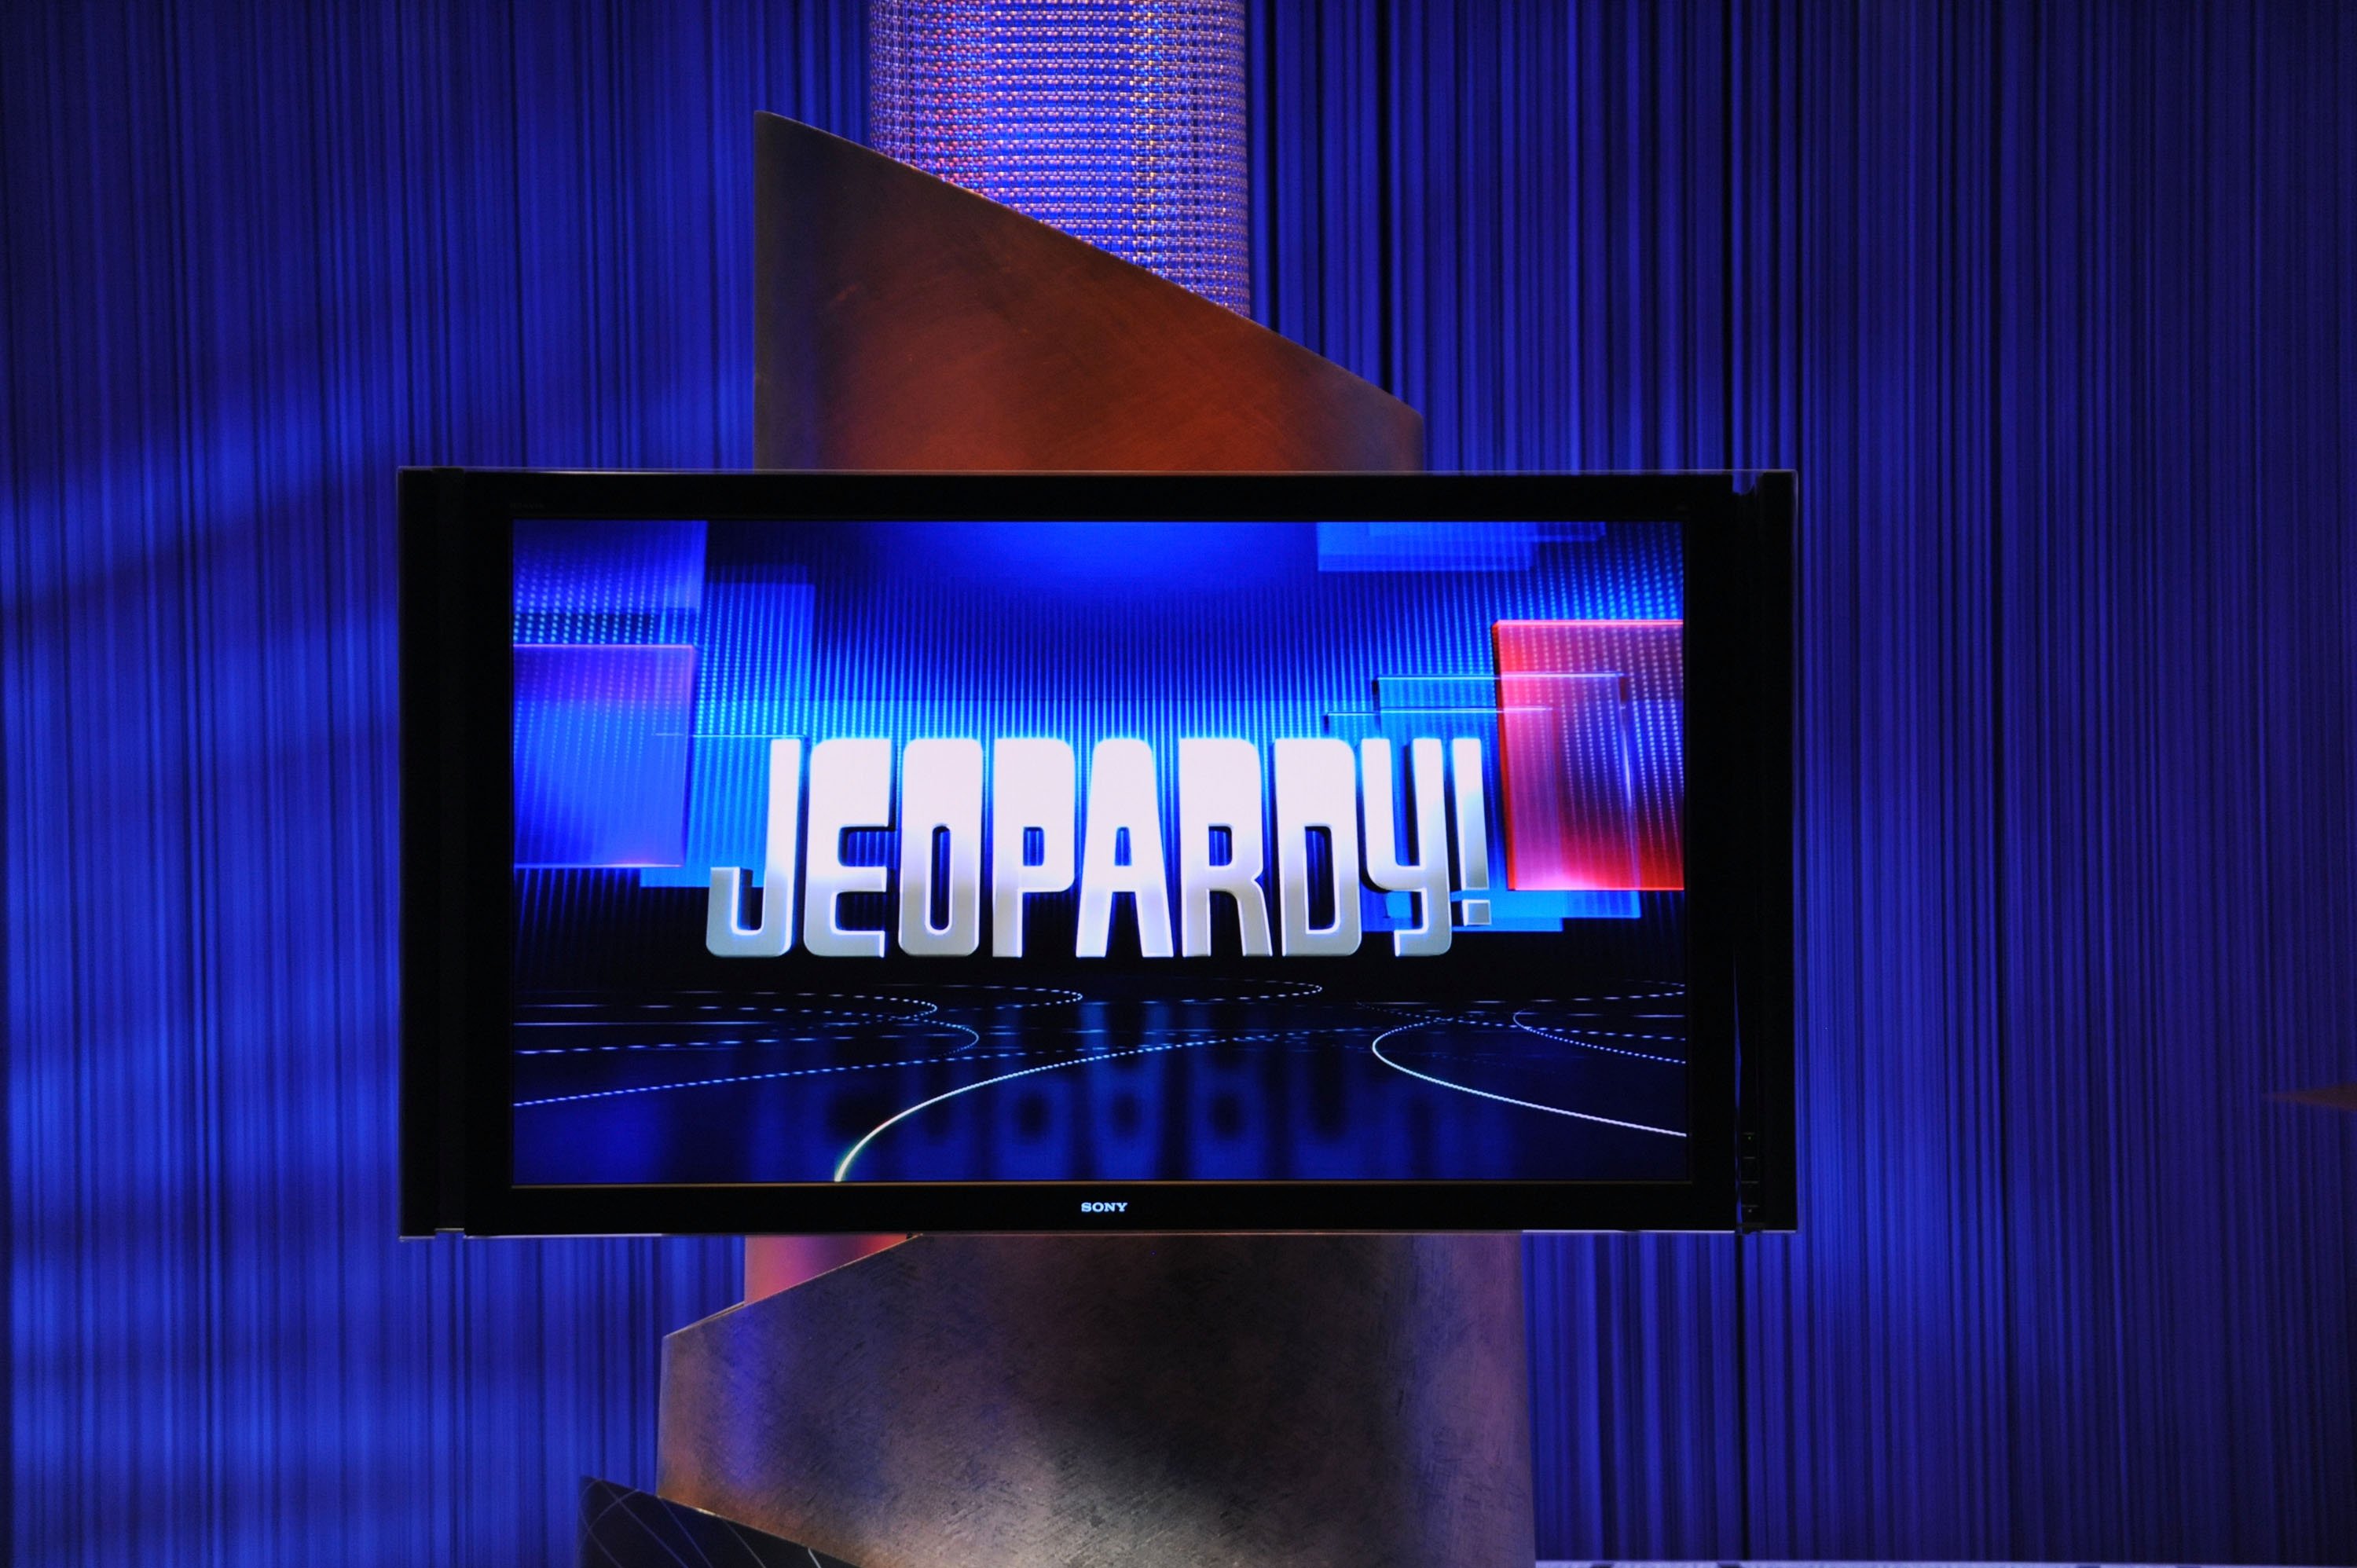 On the set of legendary quiz show 'Jeopardy!'